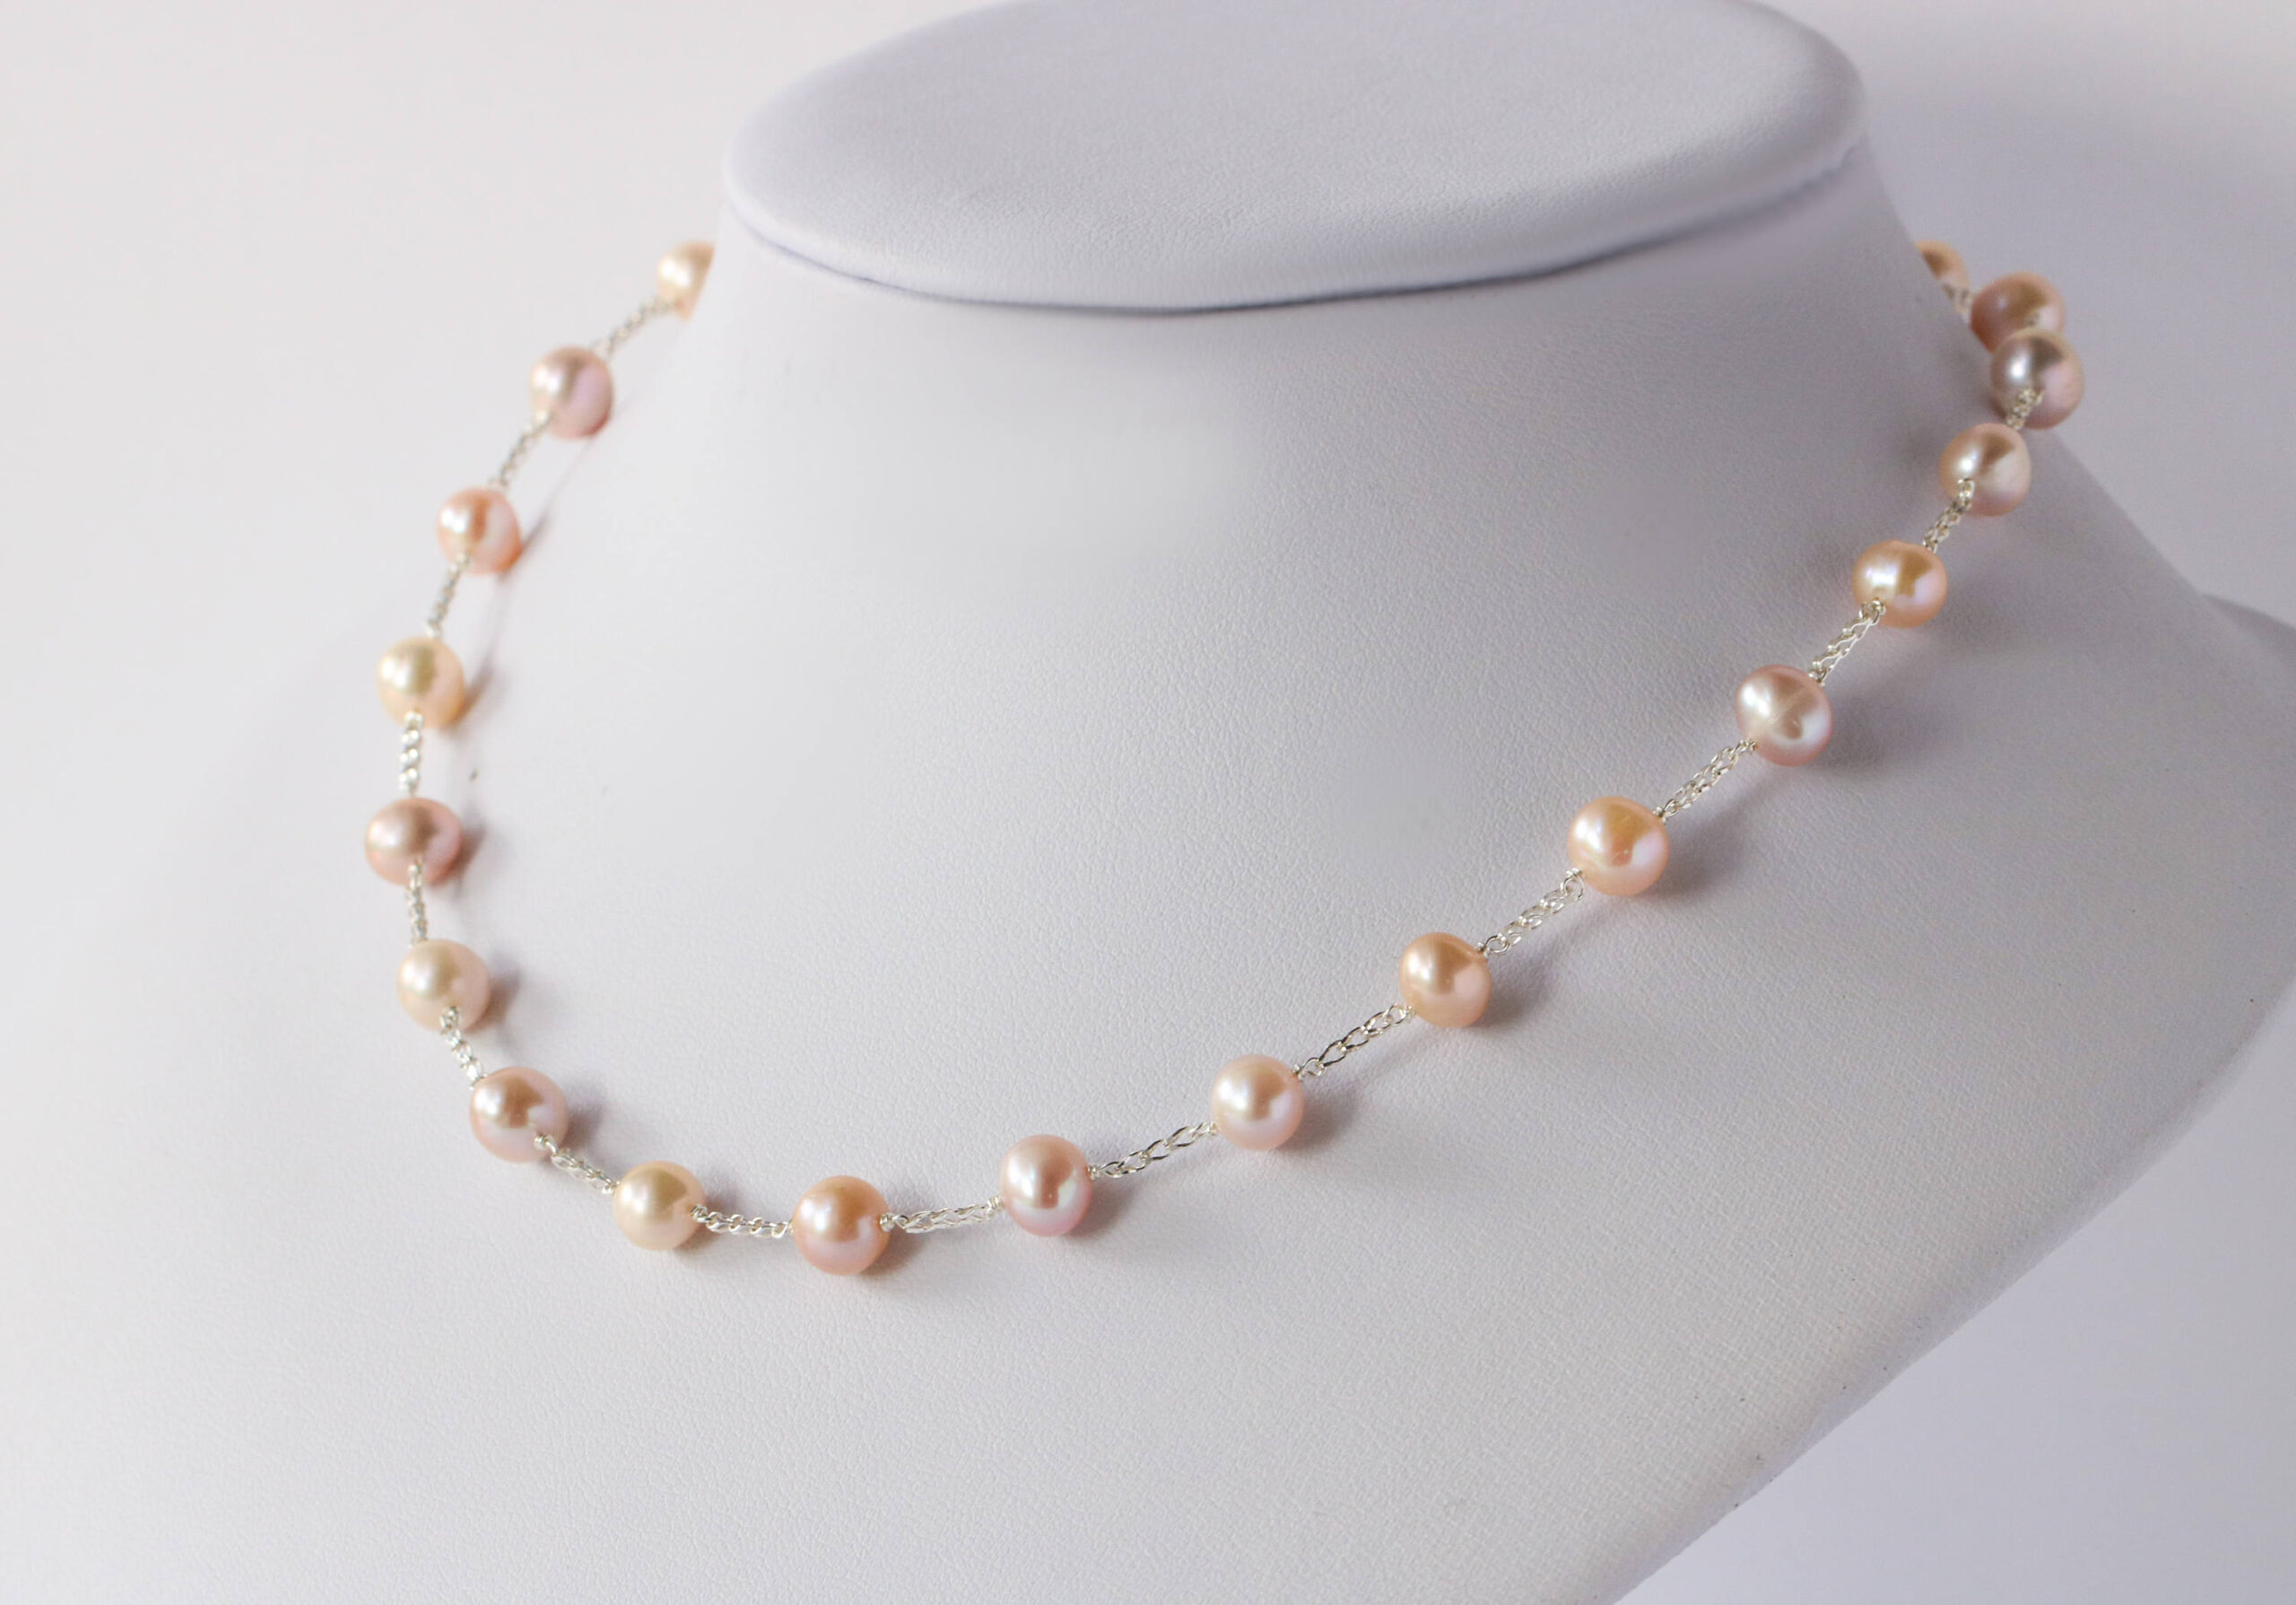 Peach and Mauve Pearl Necklace, Elegant Silver Bridal Necklace